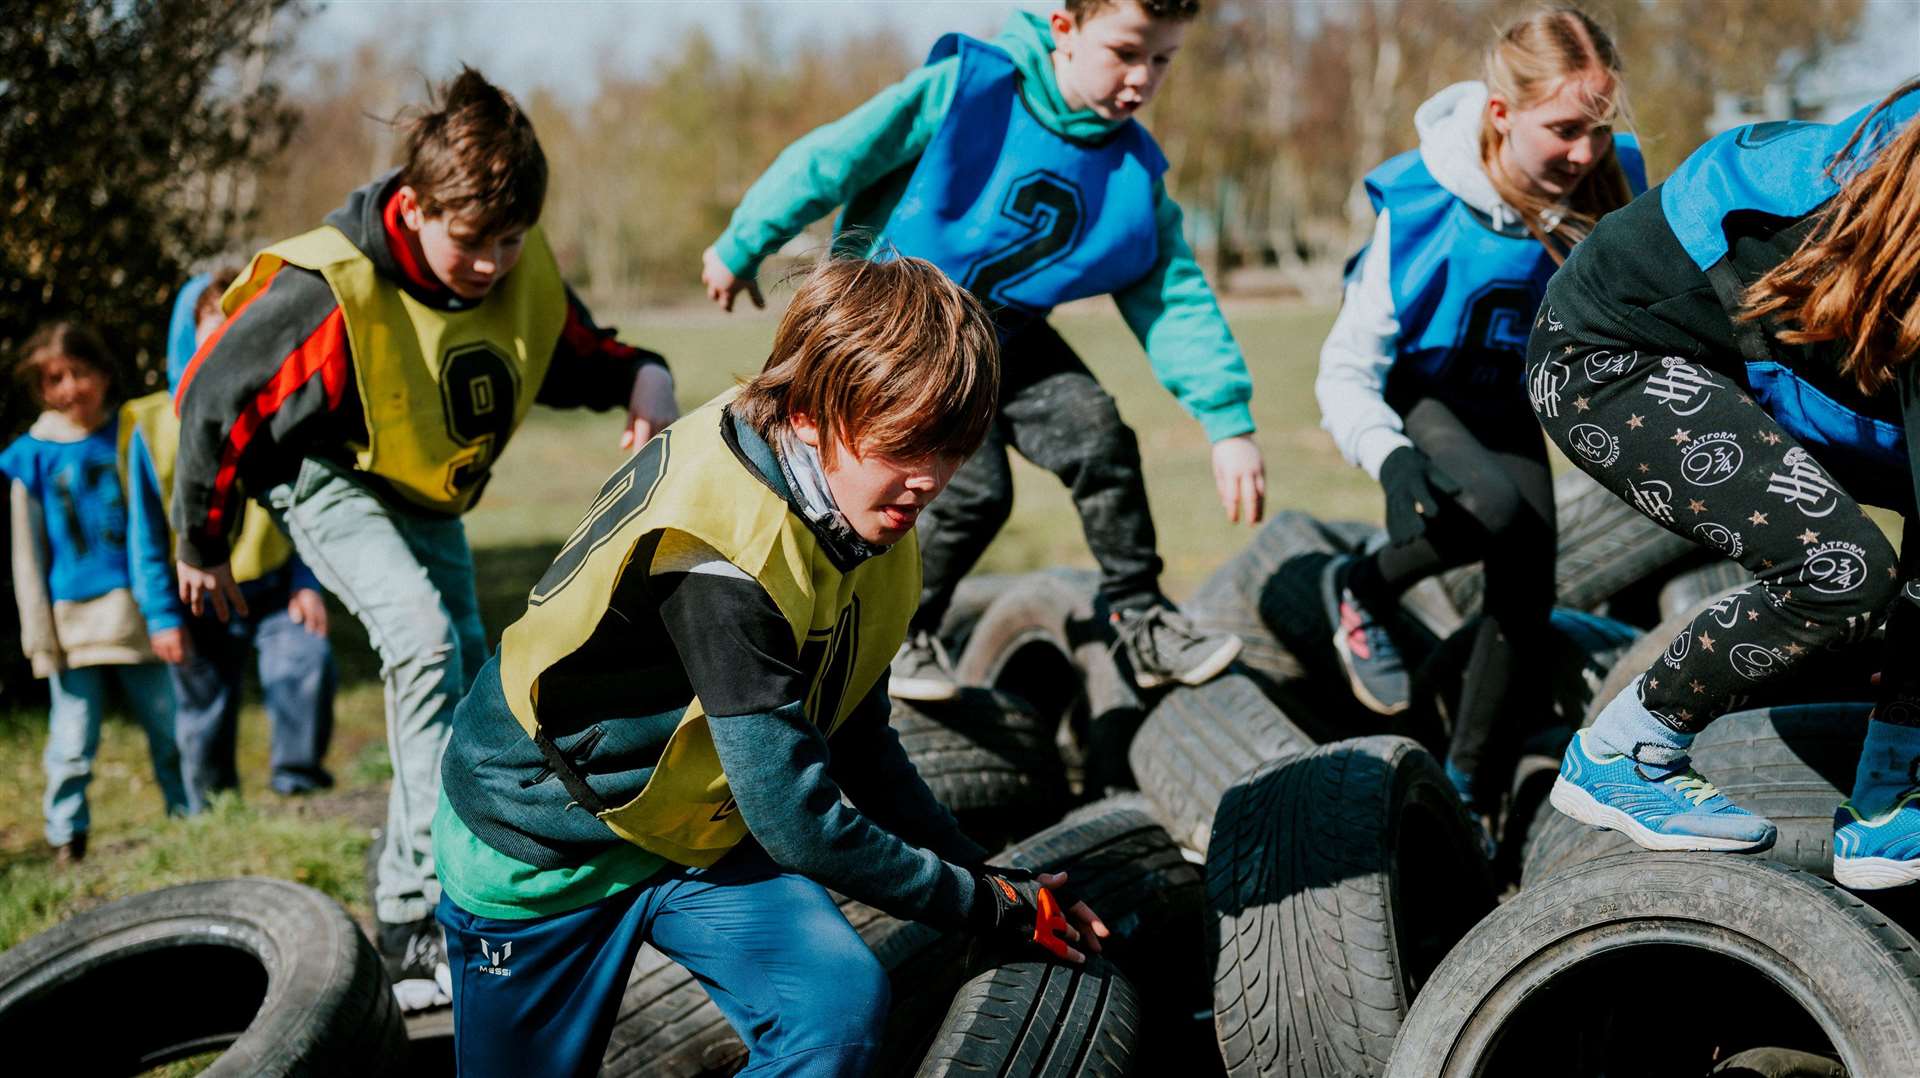 Take on the challenge at Betteshanger’s Boonies assault course